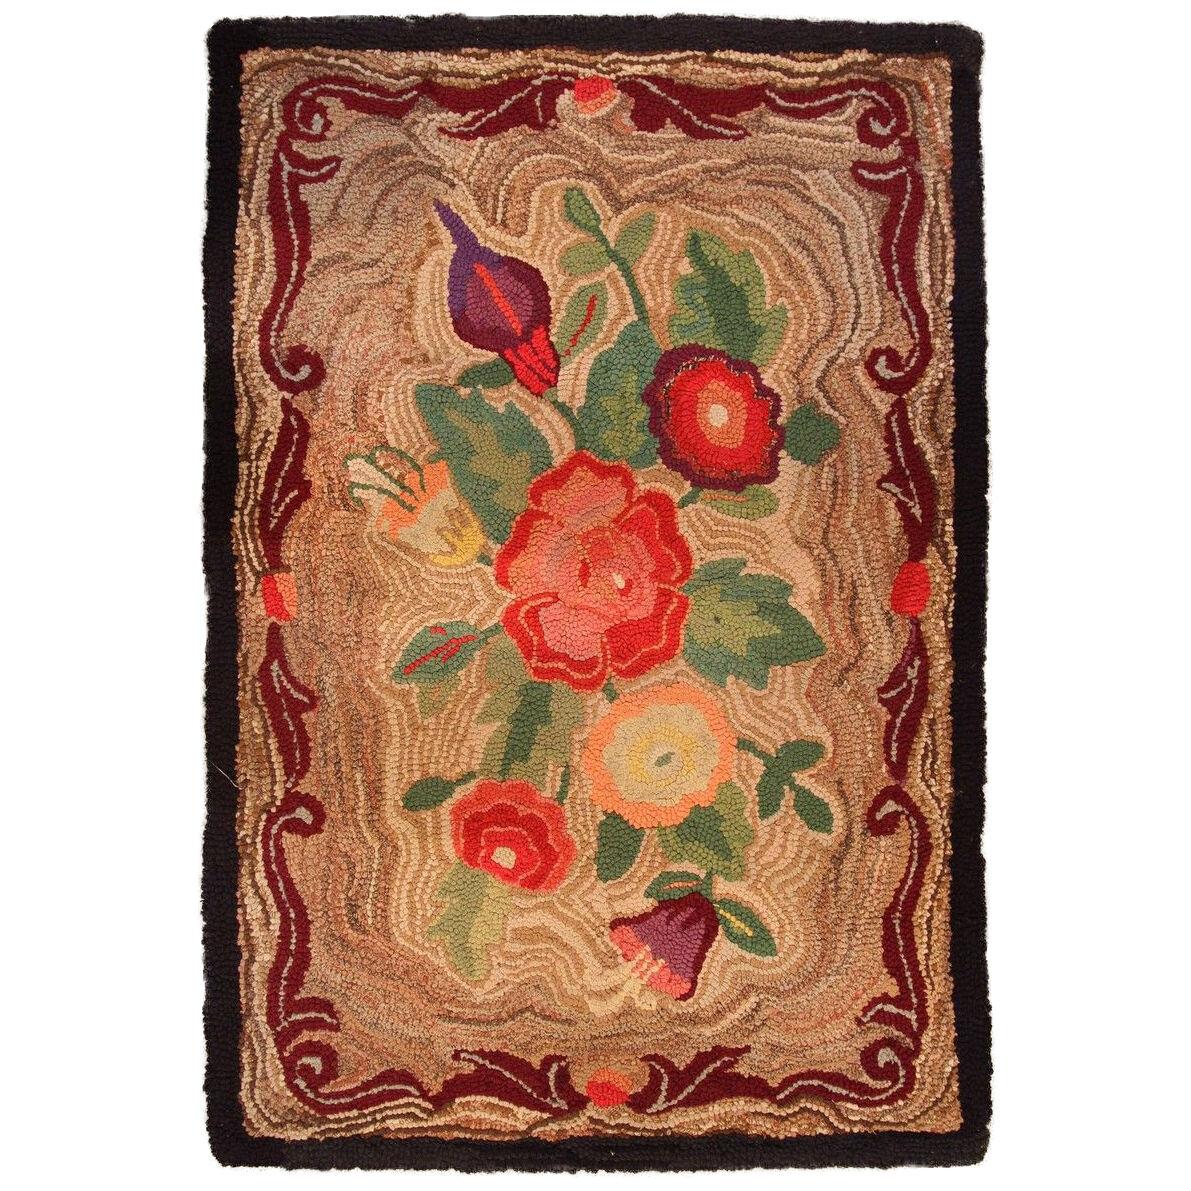 Antique Hand-hooked Floral Beige-brown and Red Wool Rug